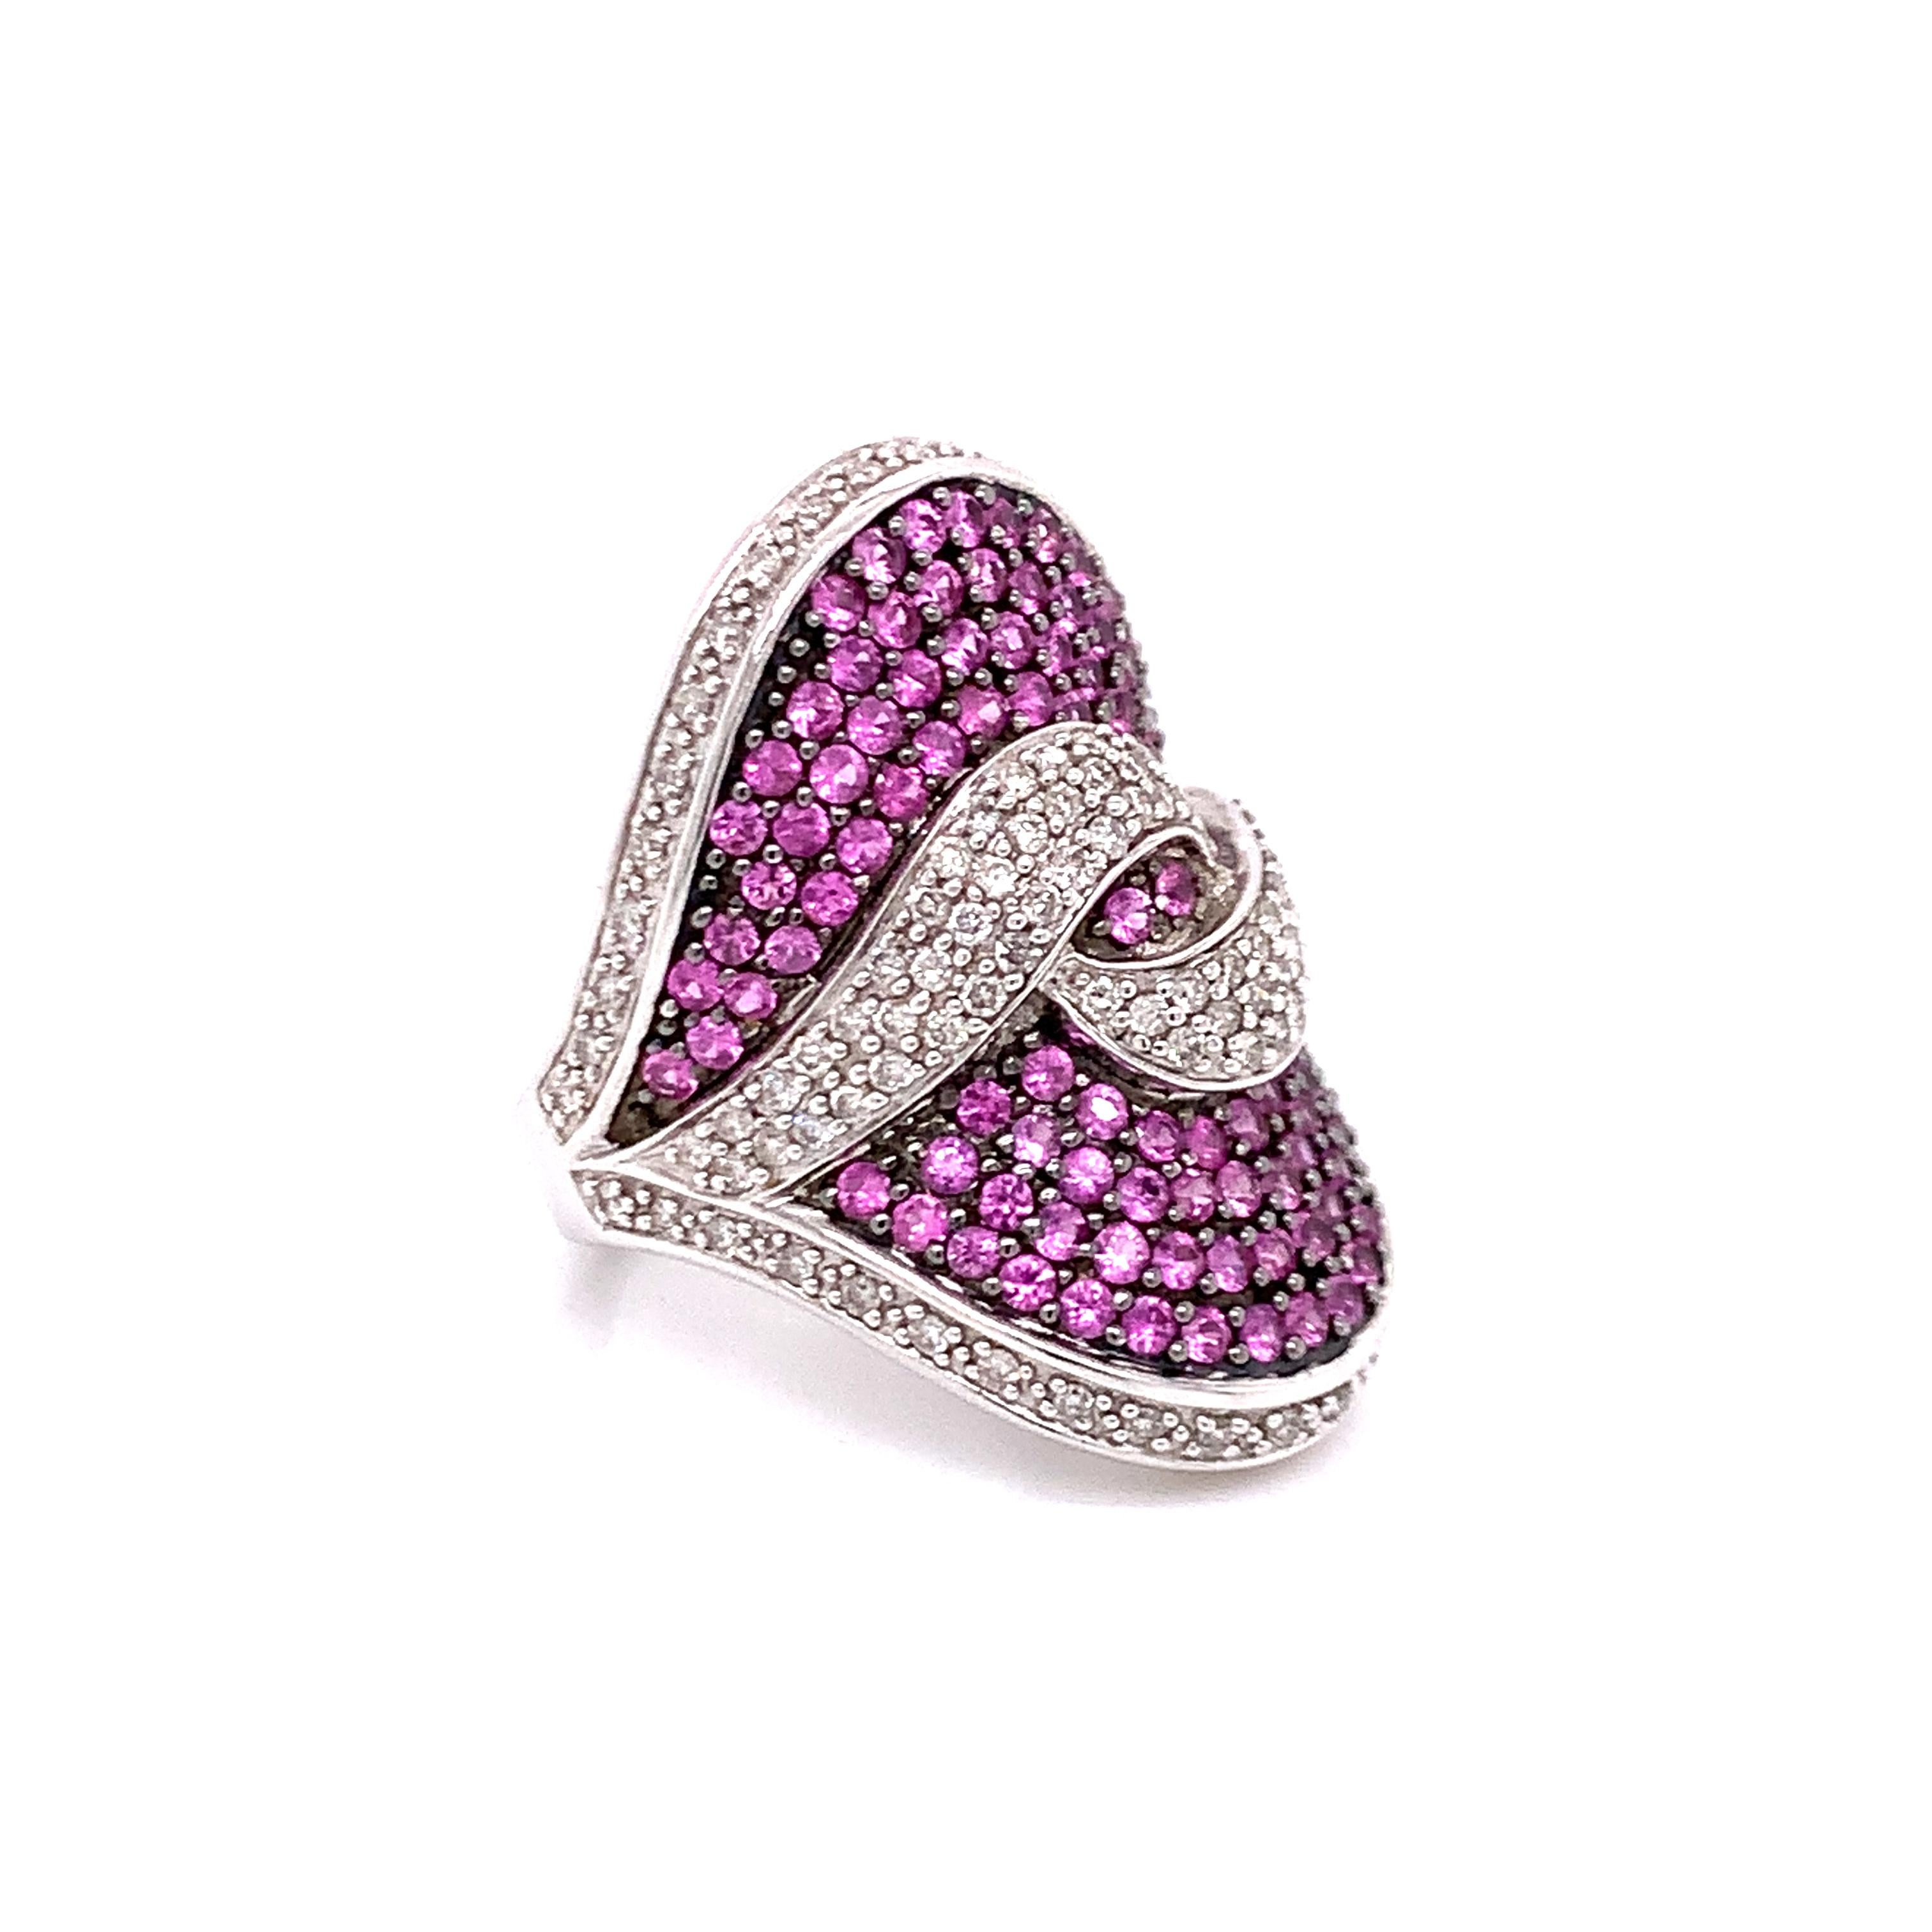 A gorgeous cluster ring containing round-cut amethyst and round-cut diamonds, all set in 14K white gold

Ring size 7